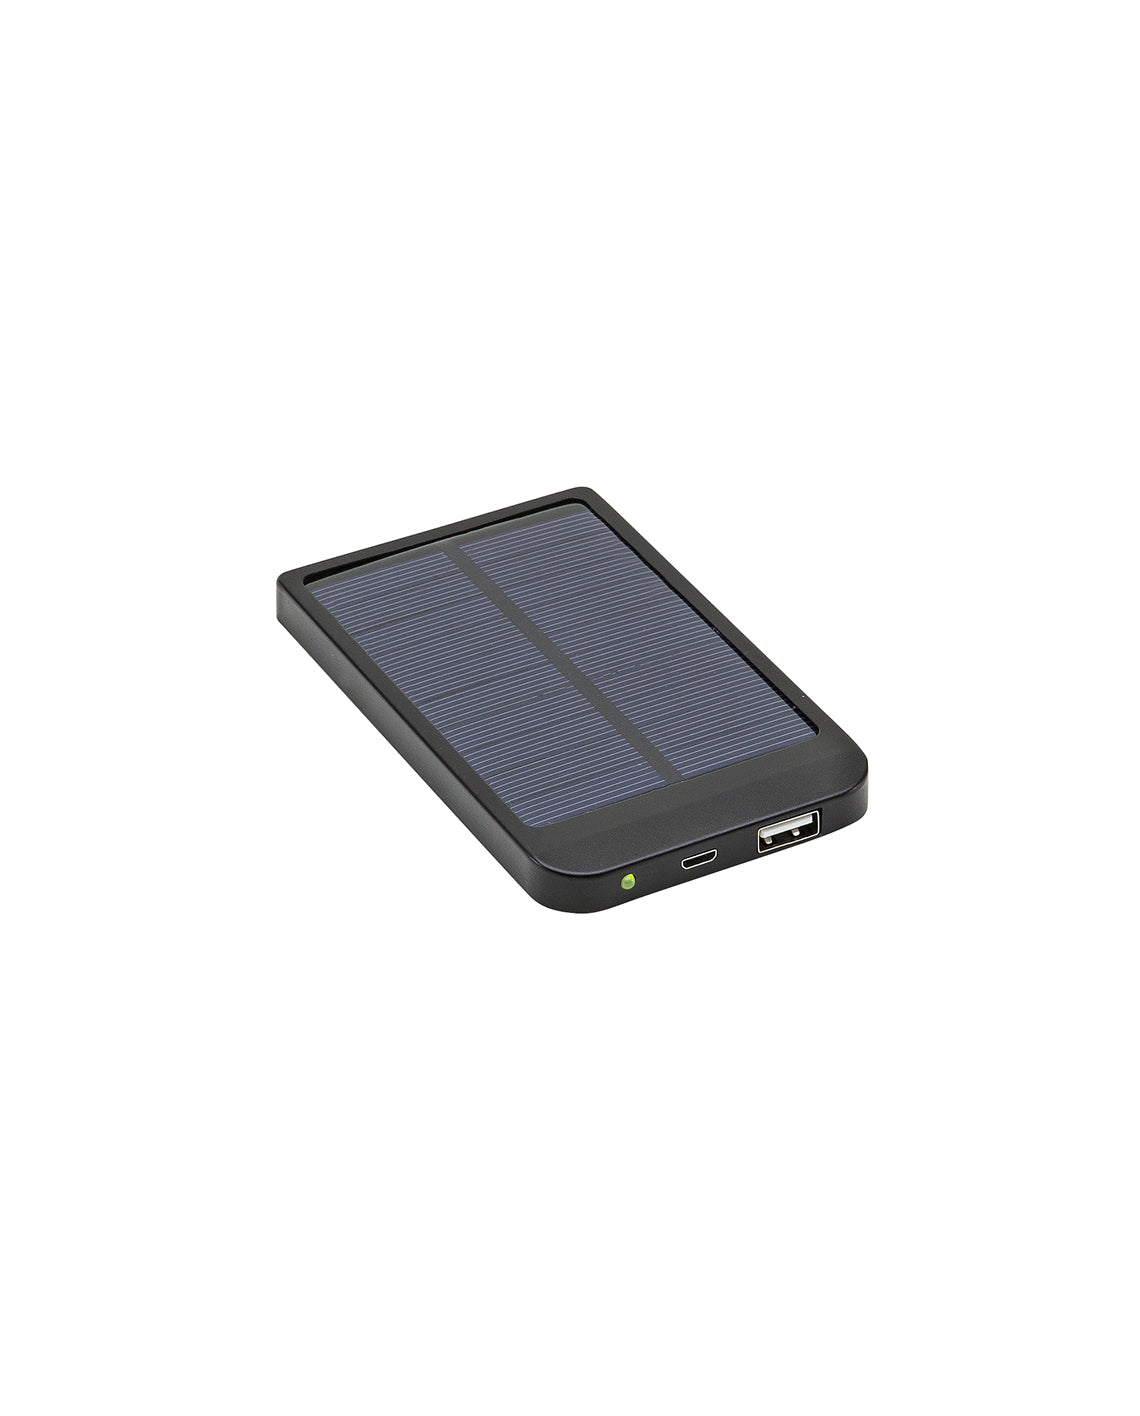 2600mAh USB Portable Solar Panel Battery Charger Power Bank For Cell Phone